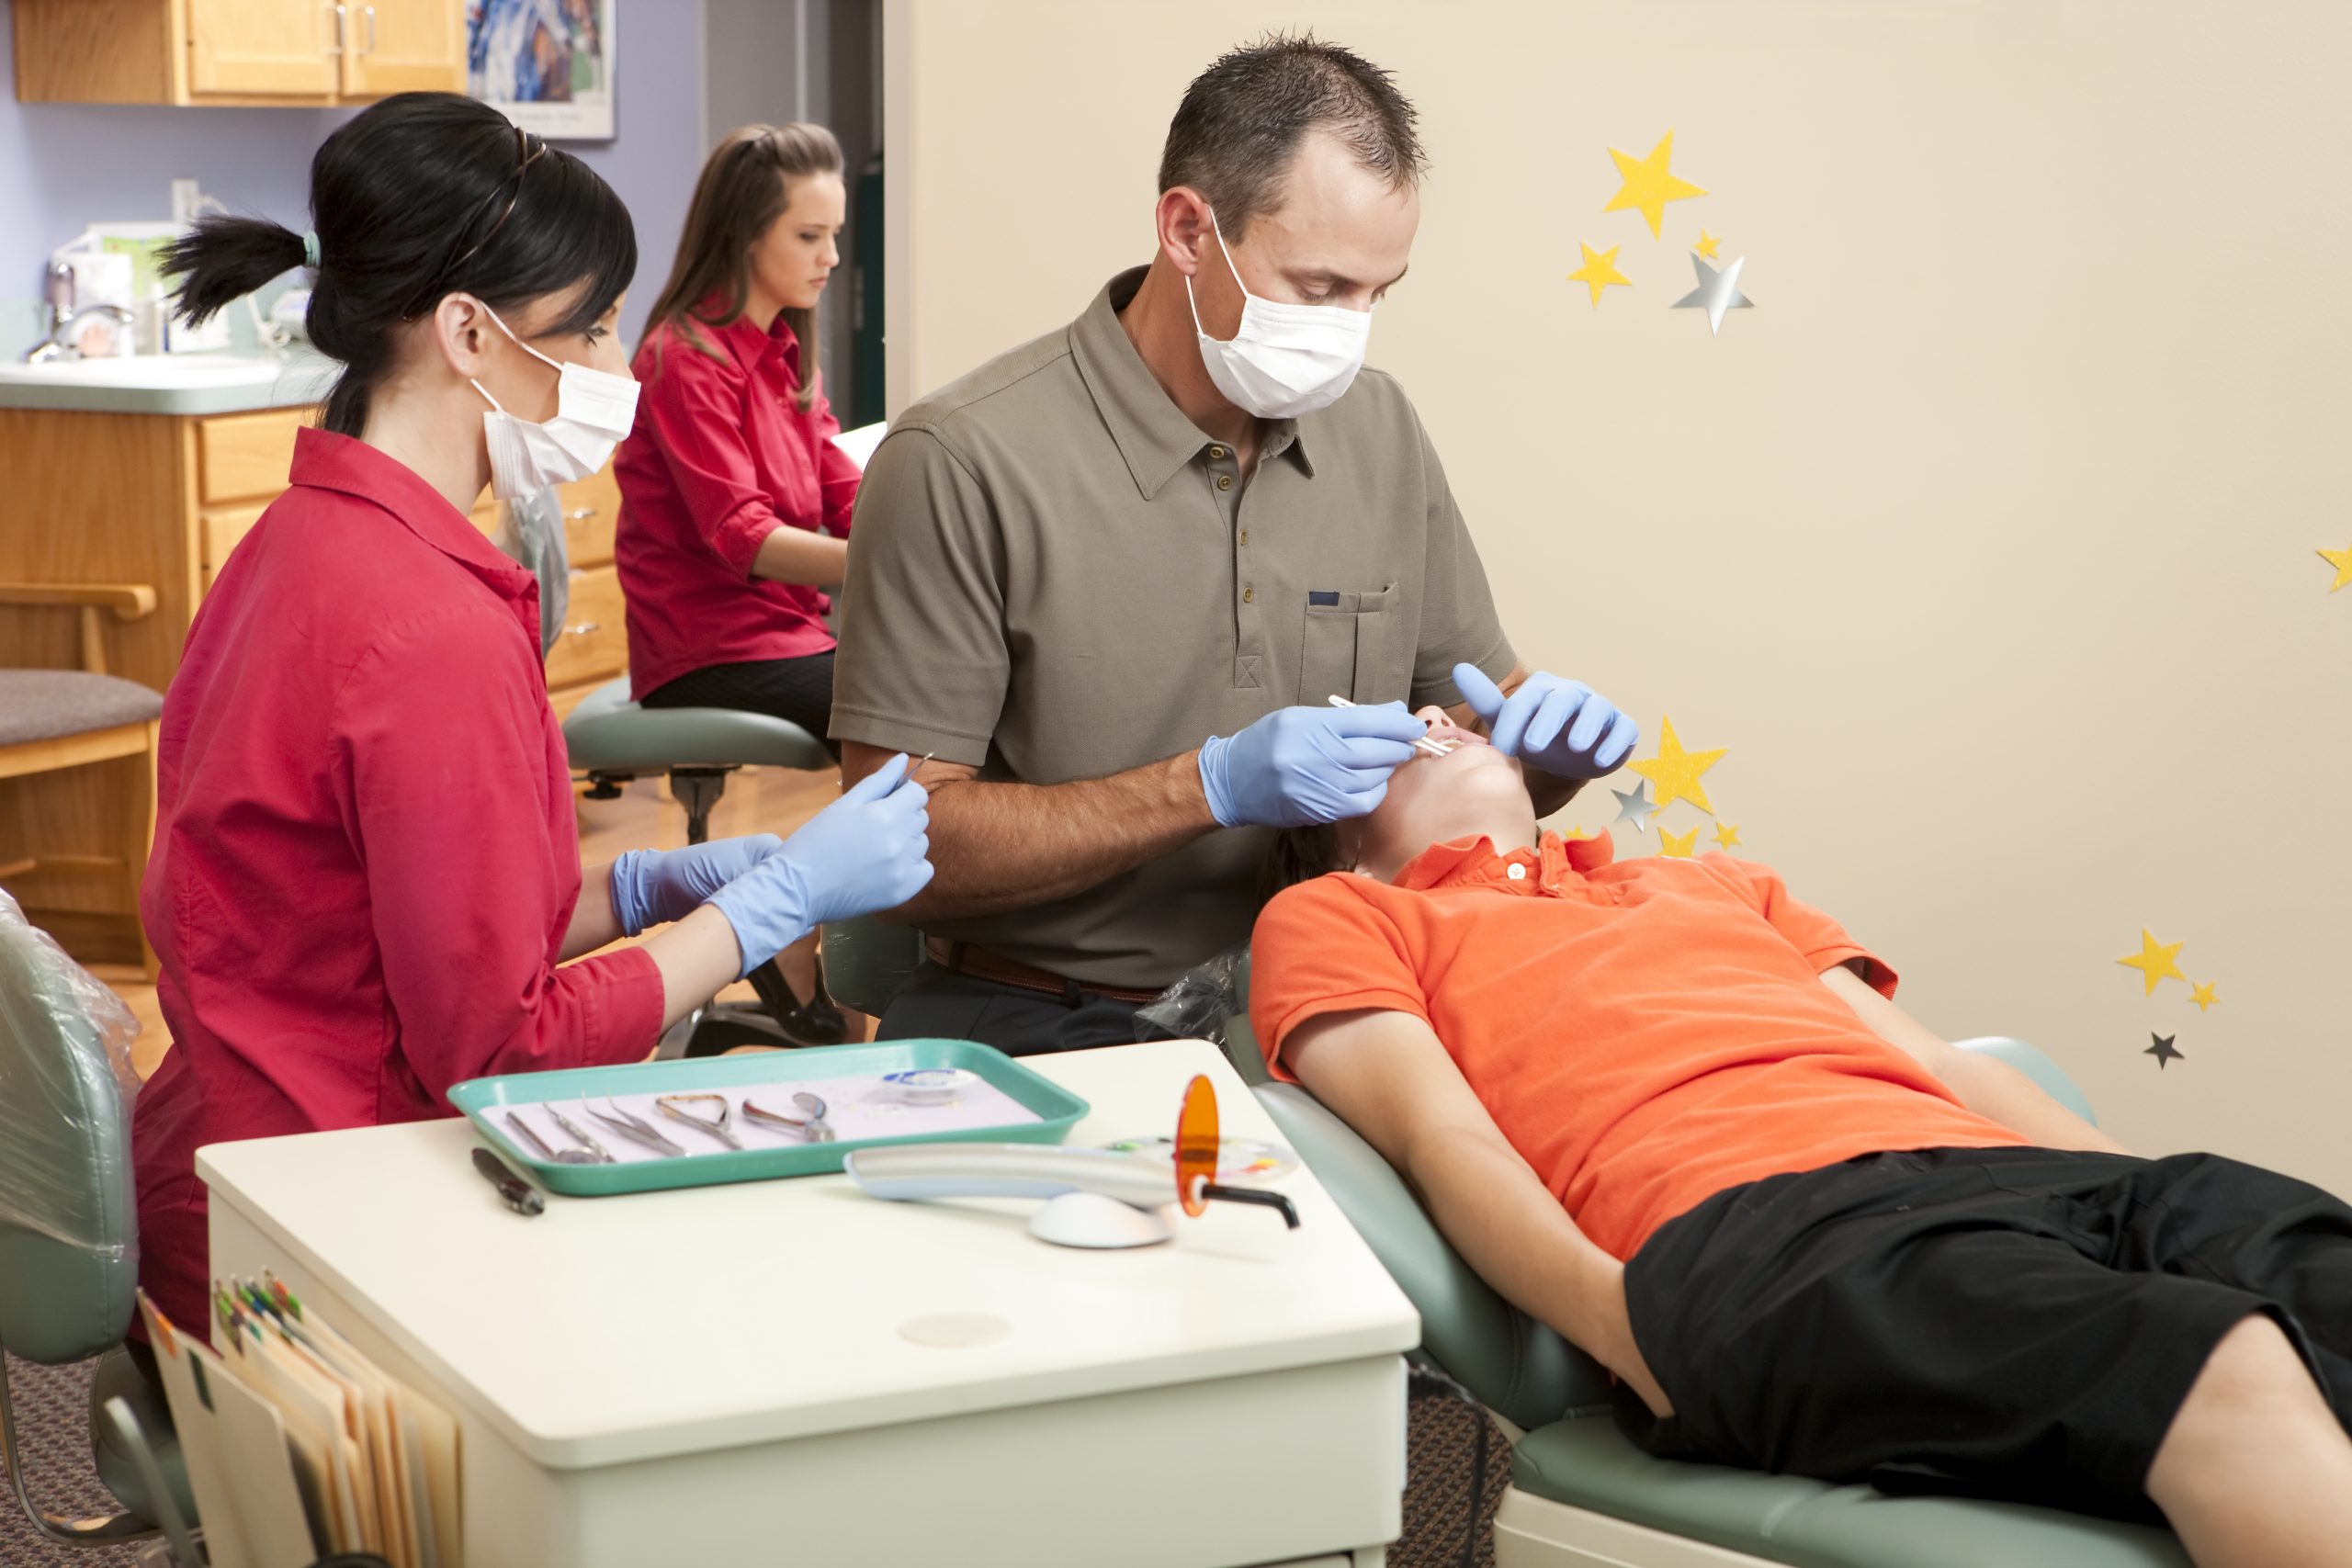 Orthodontist at Work on Patient | My Local Utah, Commercial Photography by 360 Marketing & Advertising